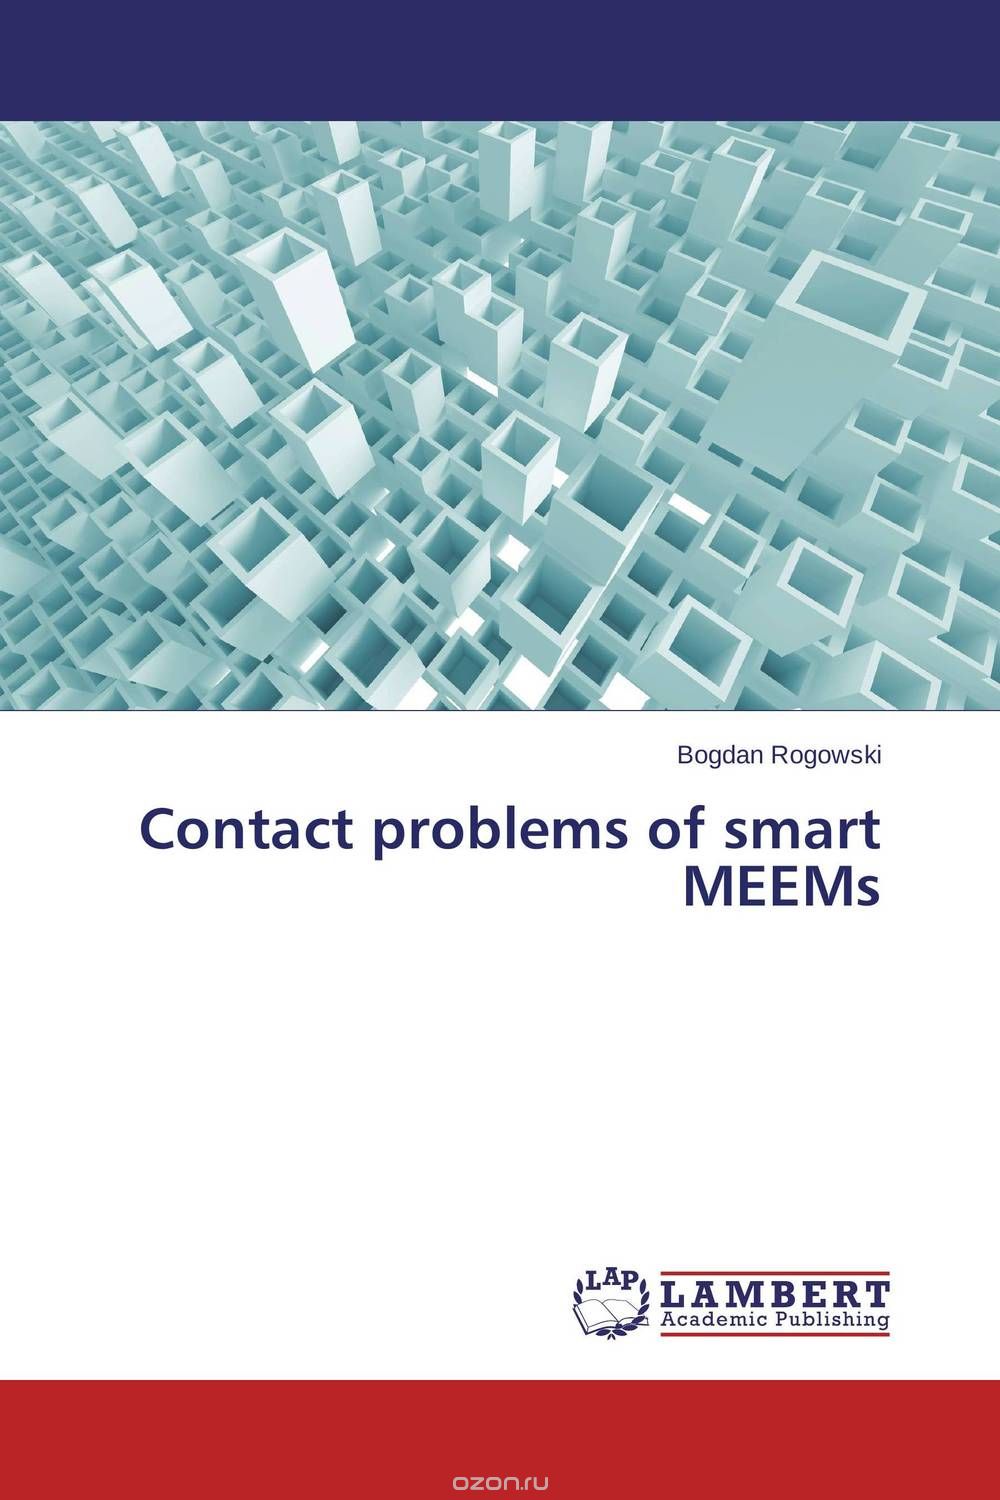 Contact problems of smart MEEMs